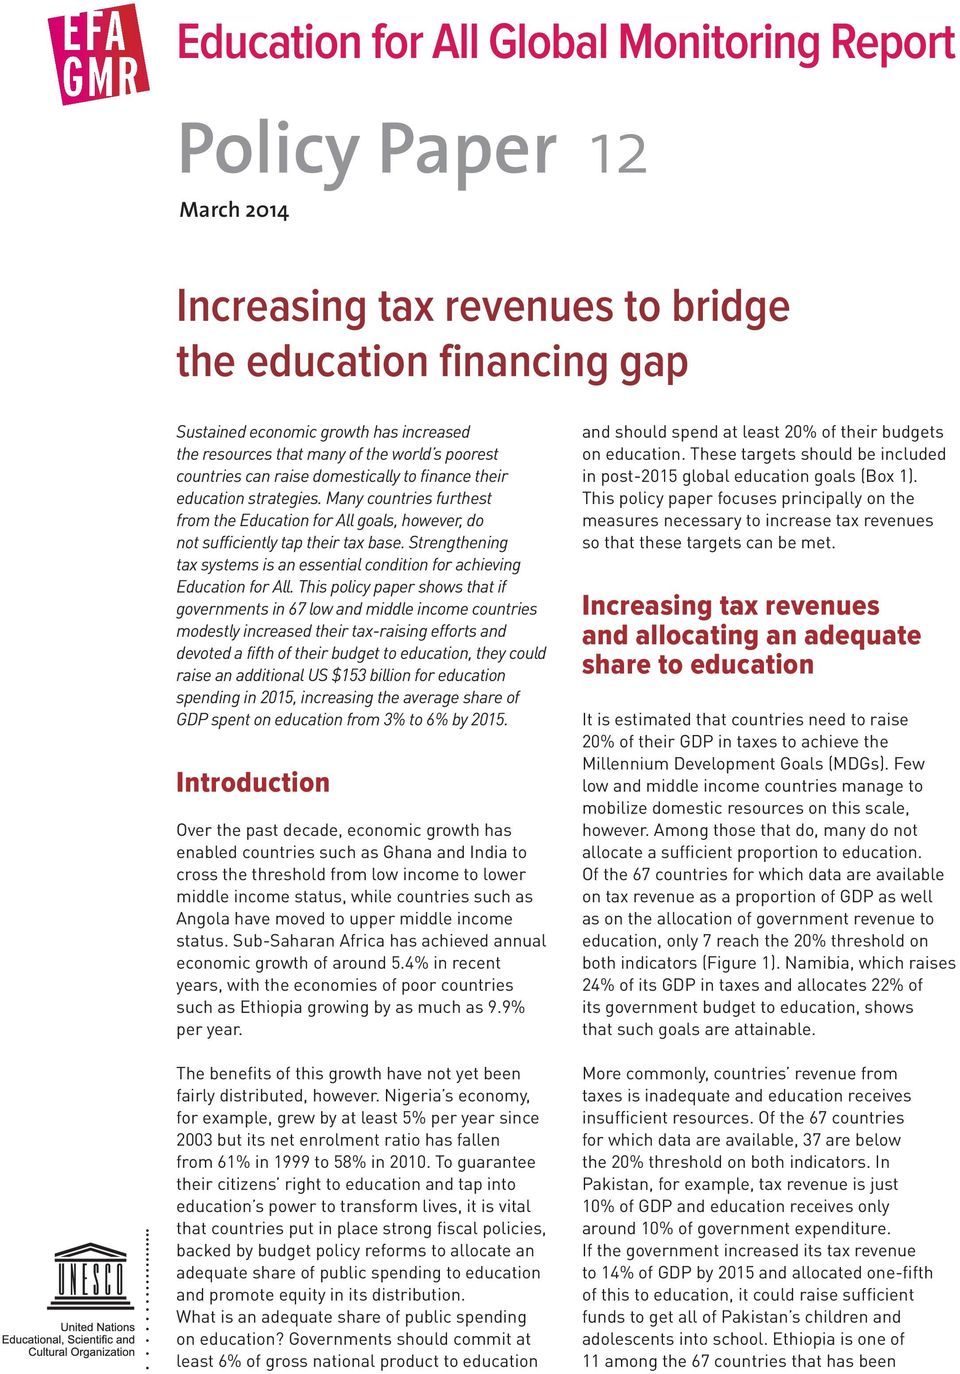 Strengthening tax systems is an essential condition for achieving Education for All.